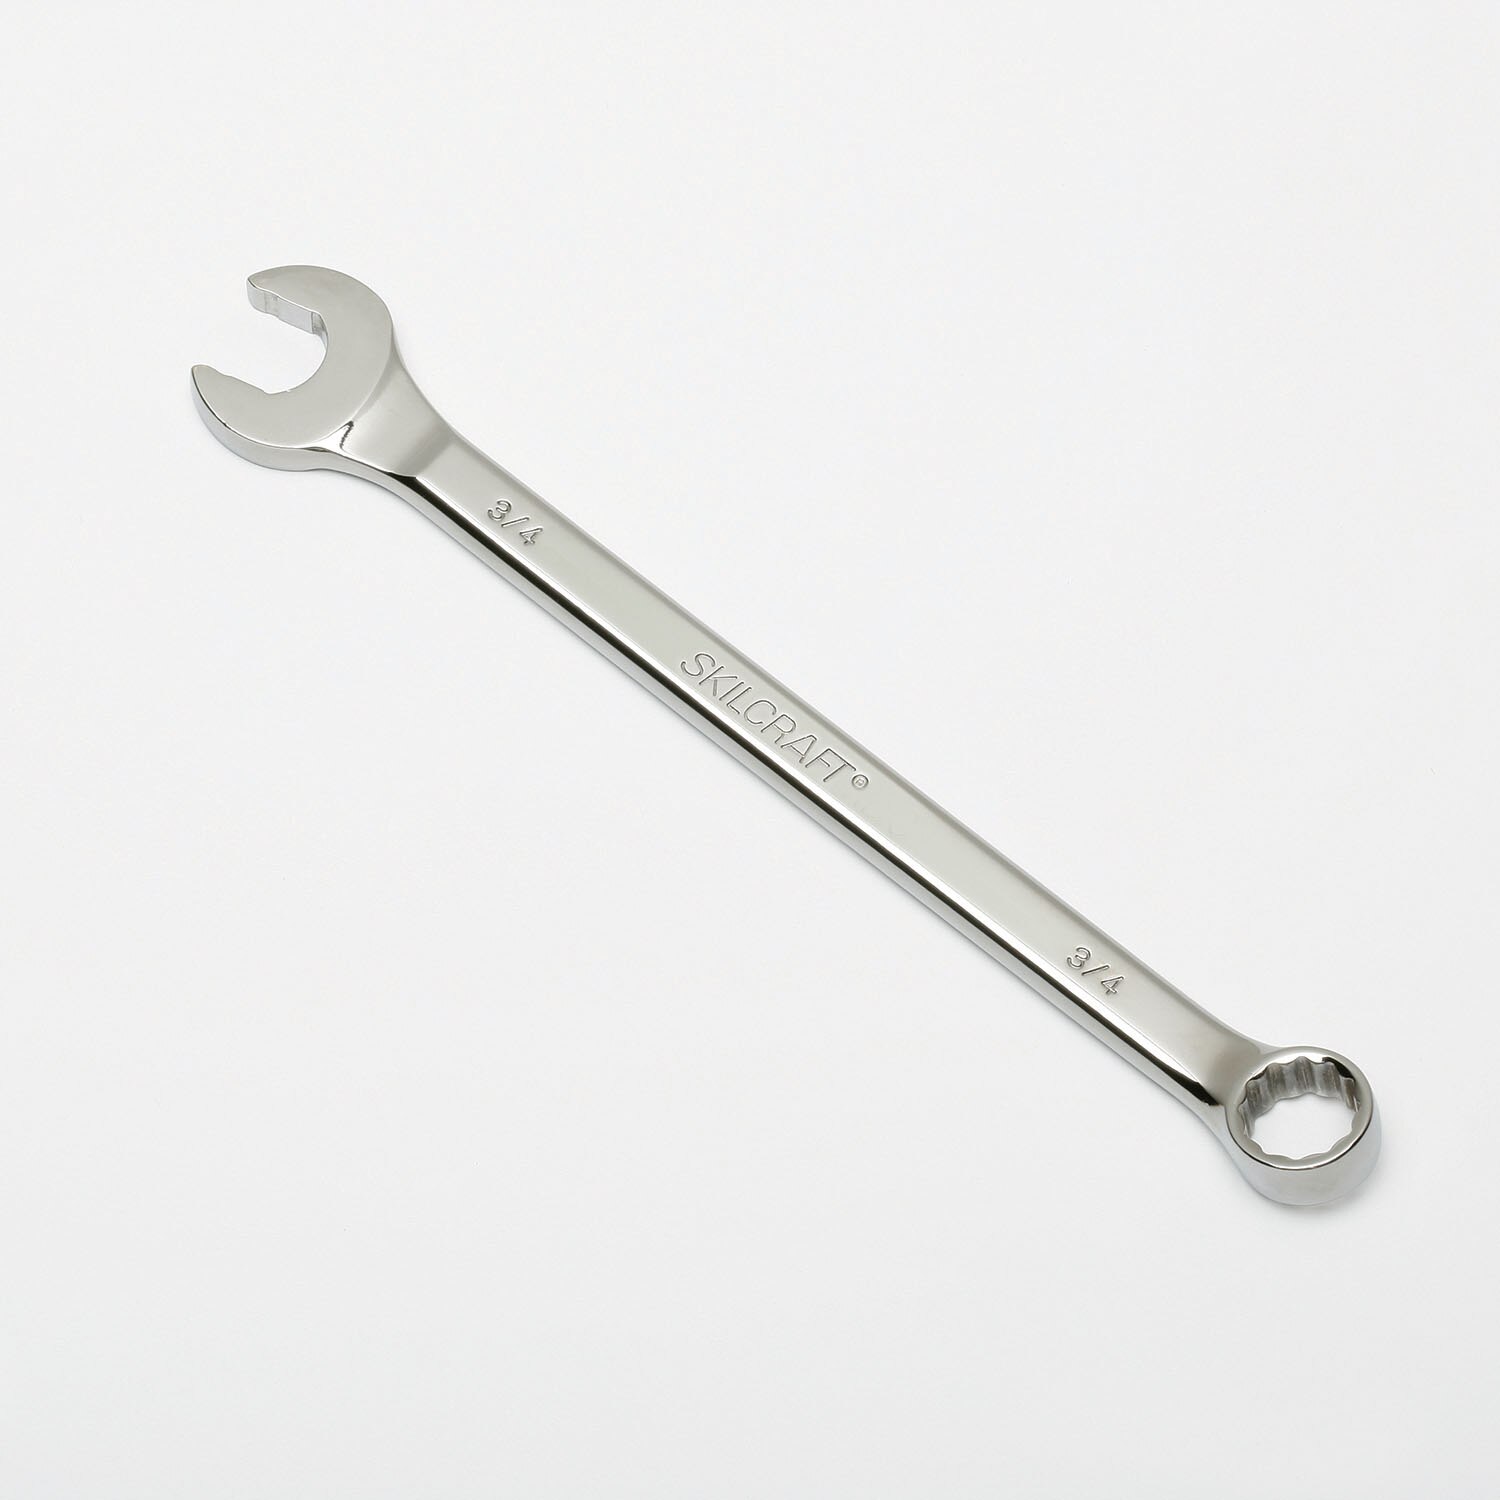 Wrench, Combination, Chrome, 12 Pt, 3/4"